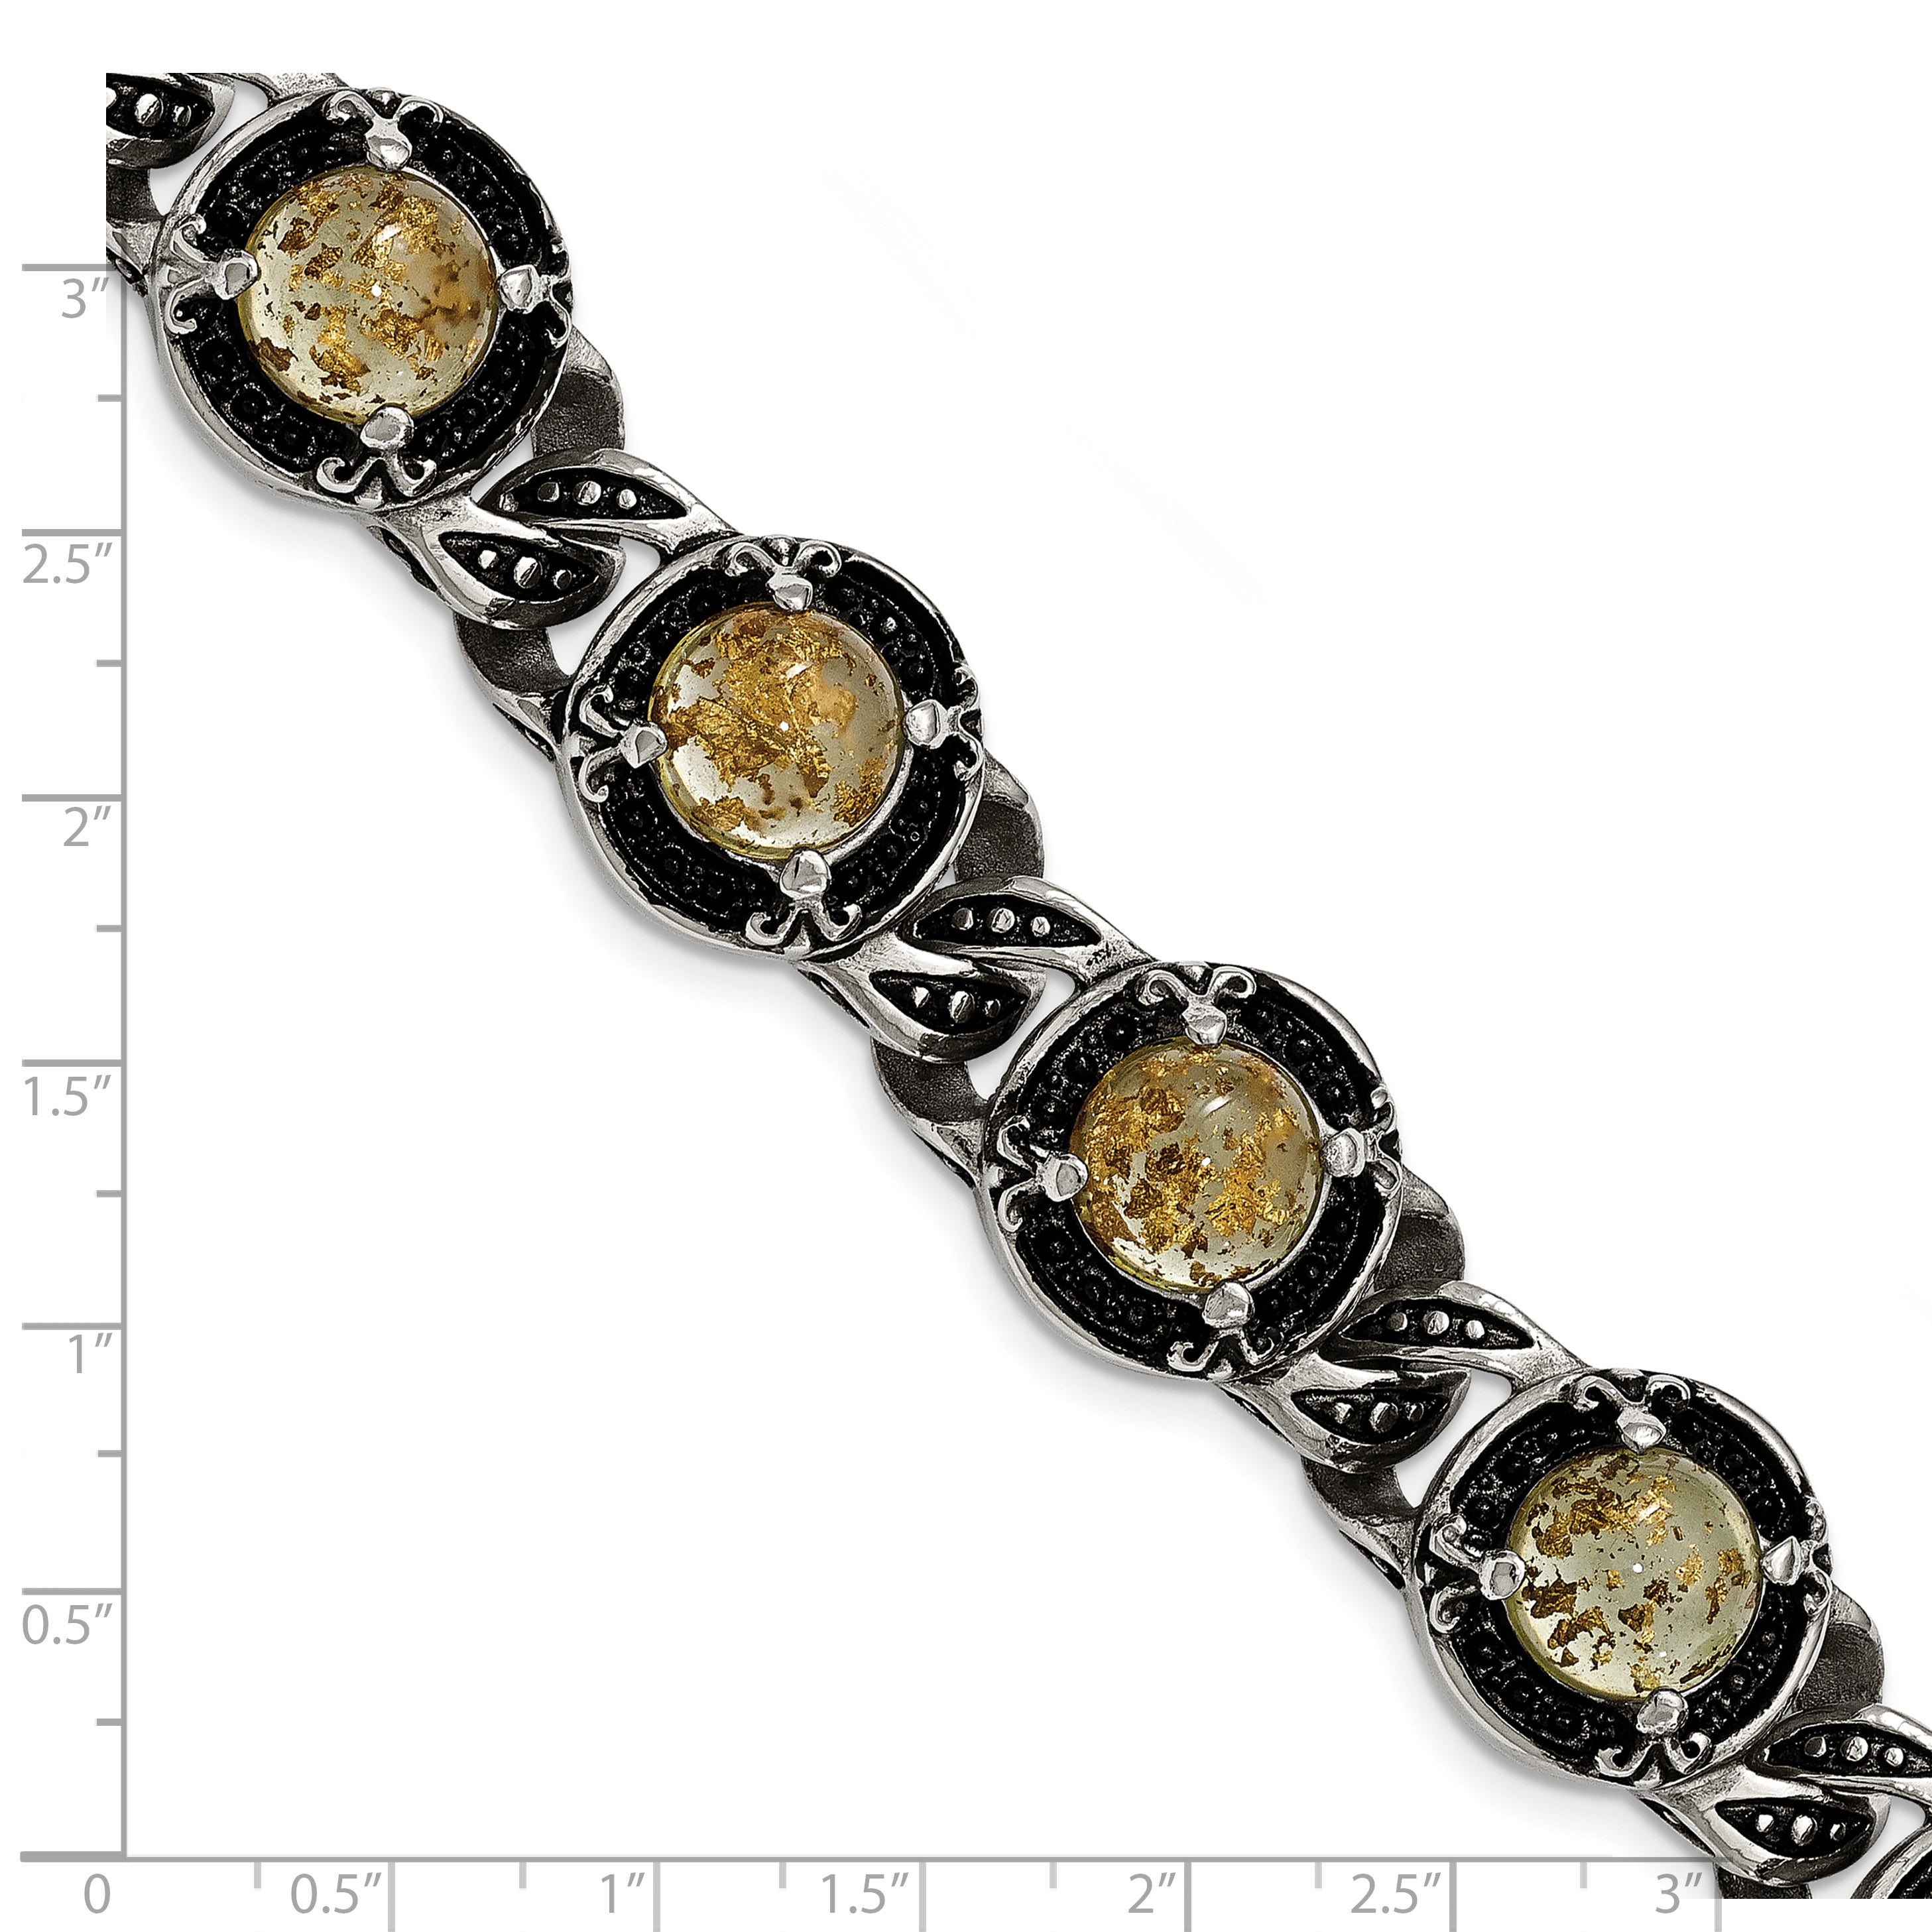 Chisel Stainless Steel Antiqued and Polished with Gold Tin Epoxy Resin 9 inch Link Bracelet